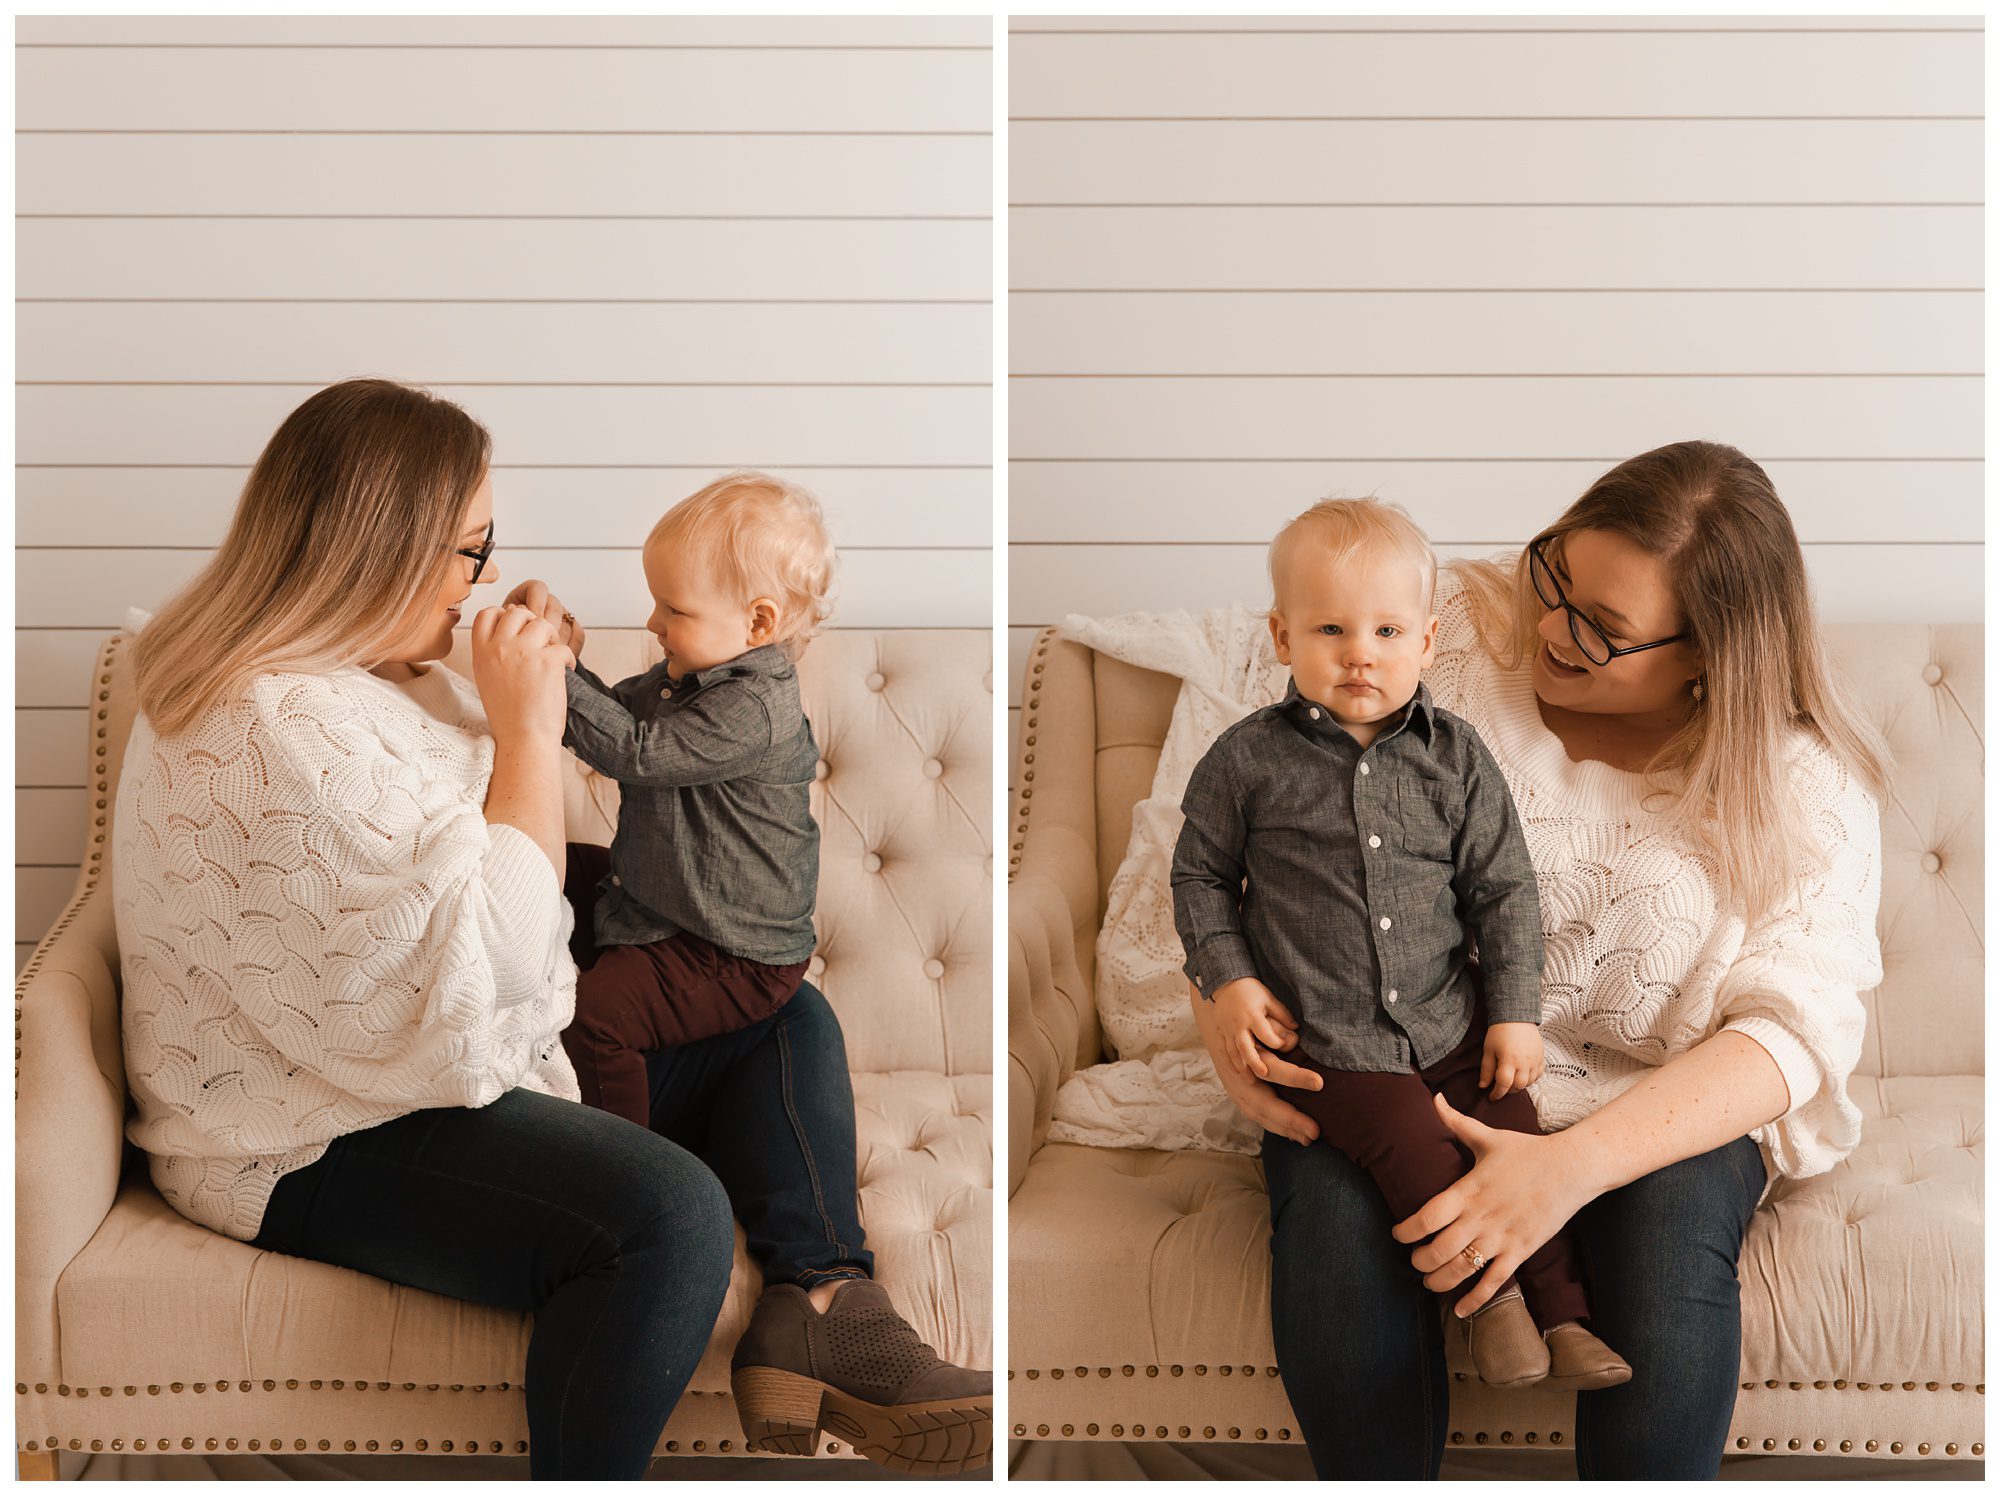 Mini Session, Nashville Mini Session, Murfreesboro Mini Session, Boutique Mini Session, Boutique Pop Up, Pop Up Photography, Pop Up Event, Mommy and Me, Mother and Son Photography